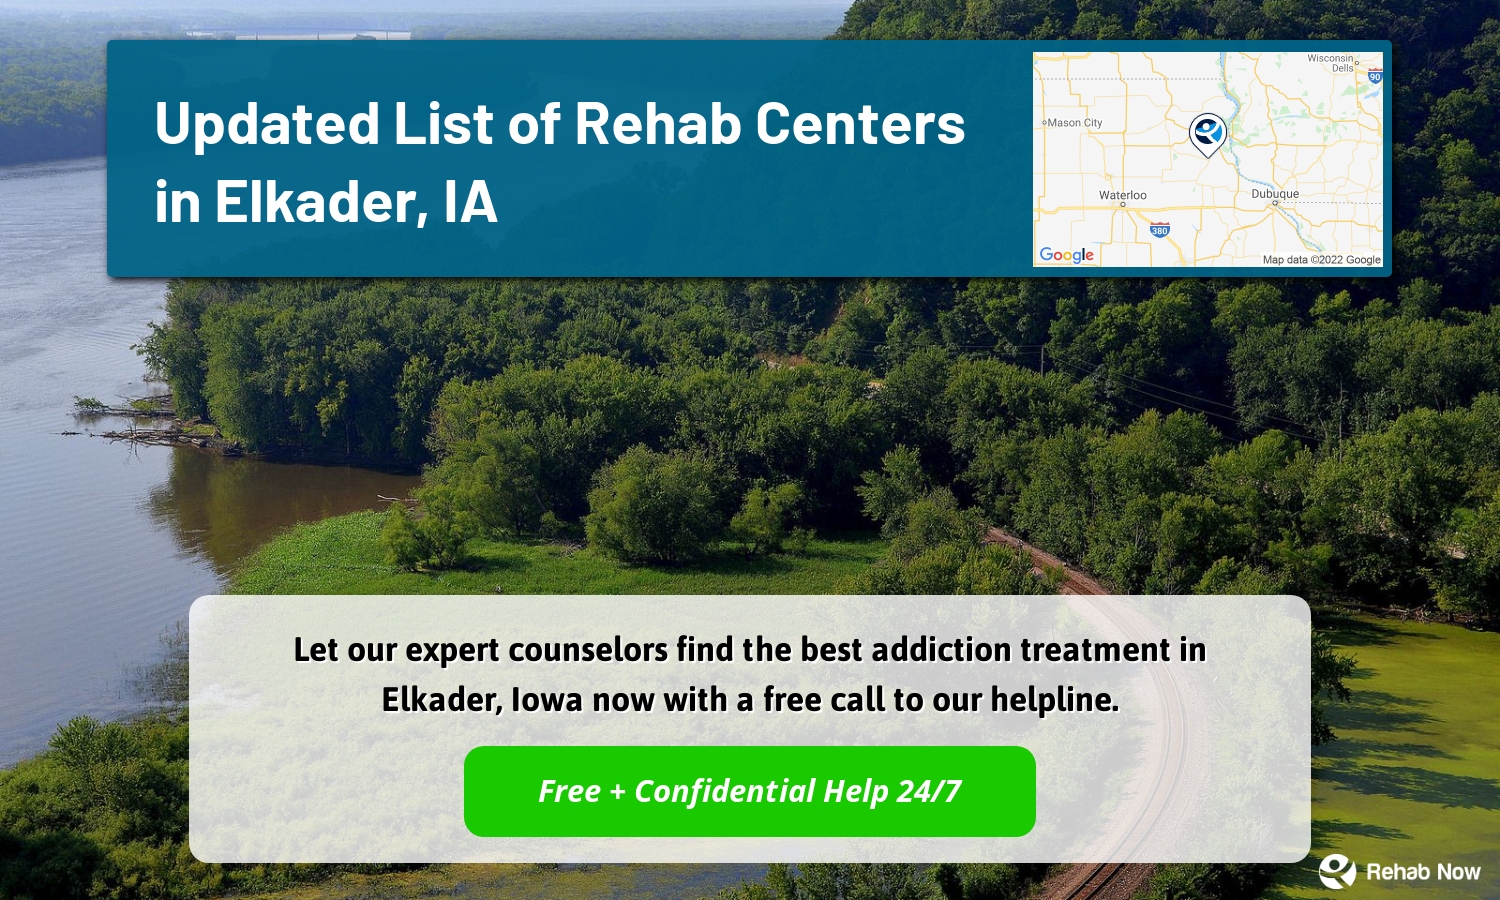 Let our expert counselors find the best addiction treatment in Elkader, Iowa now with a free call to our helpline.